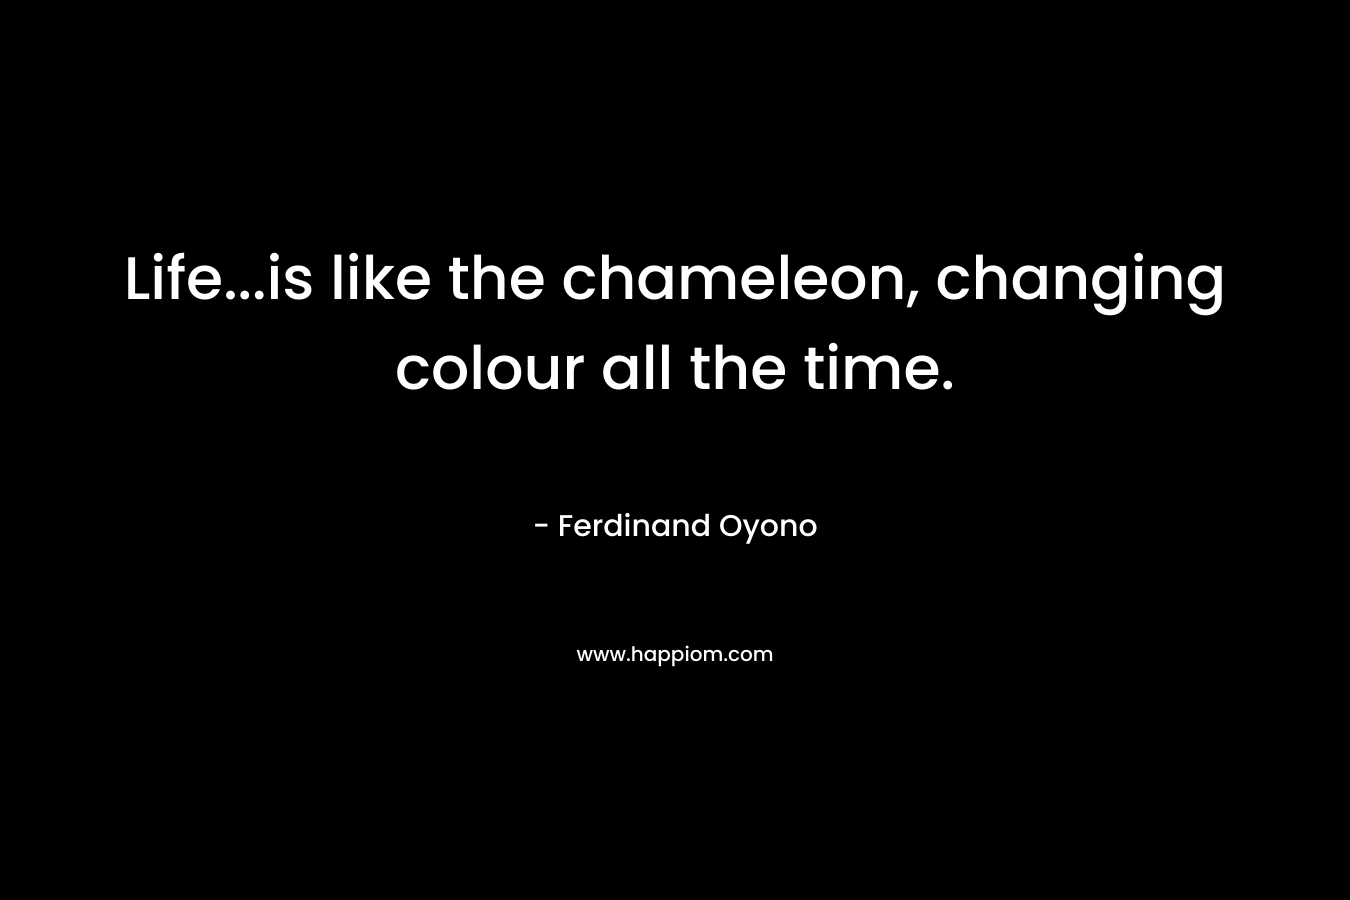 Life…is like the chameleon, changing colour all the time. – Ferdinand Oyono